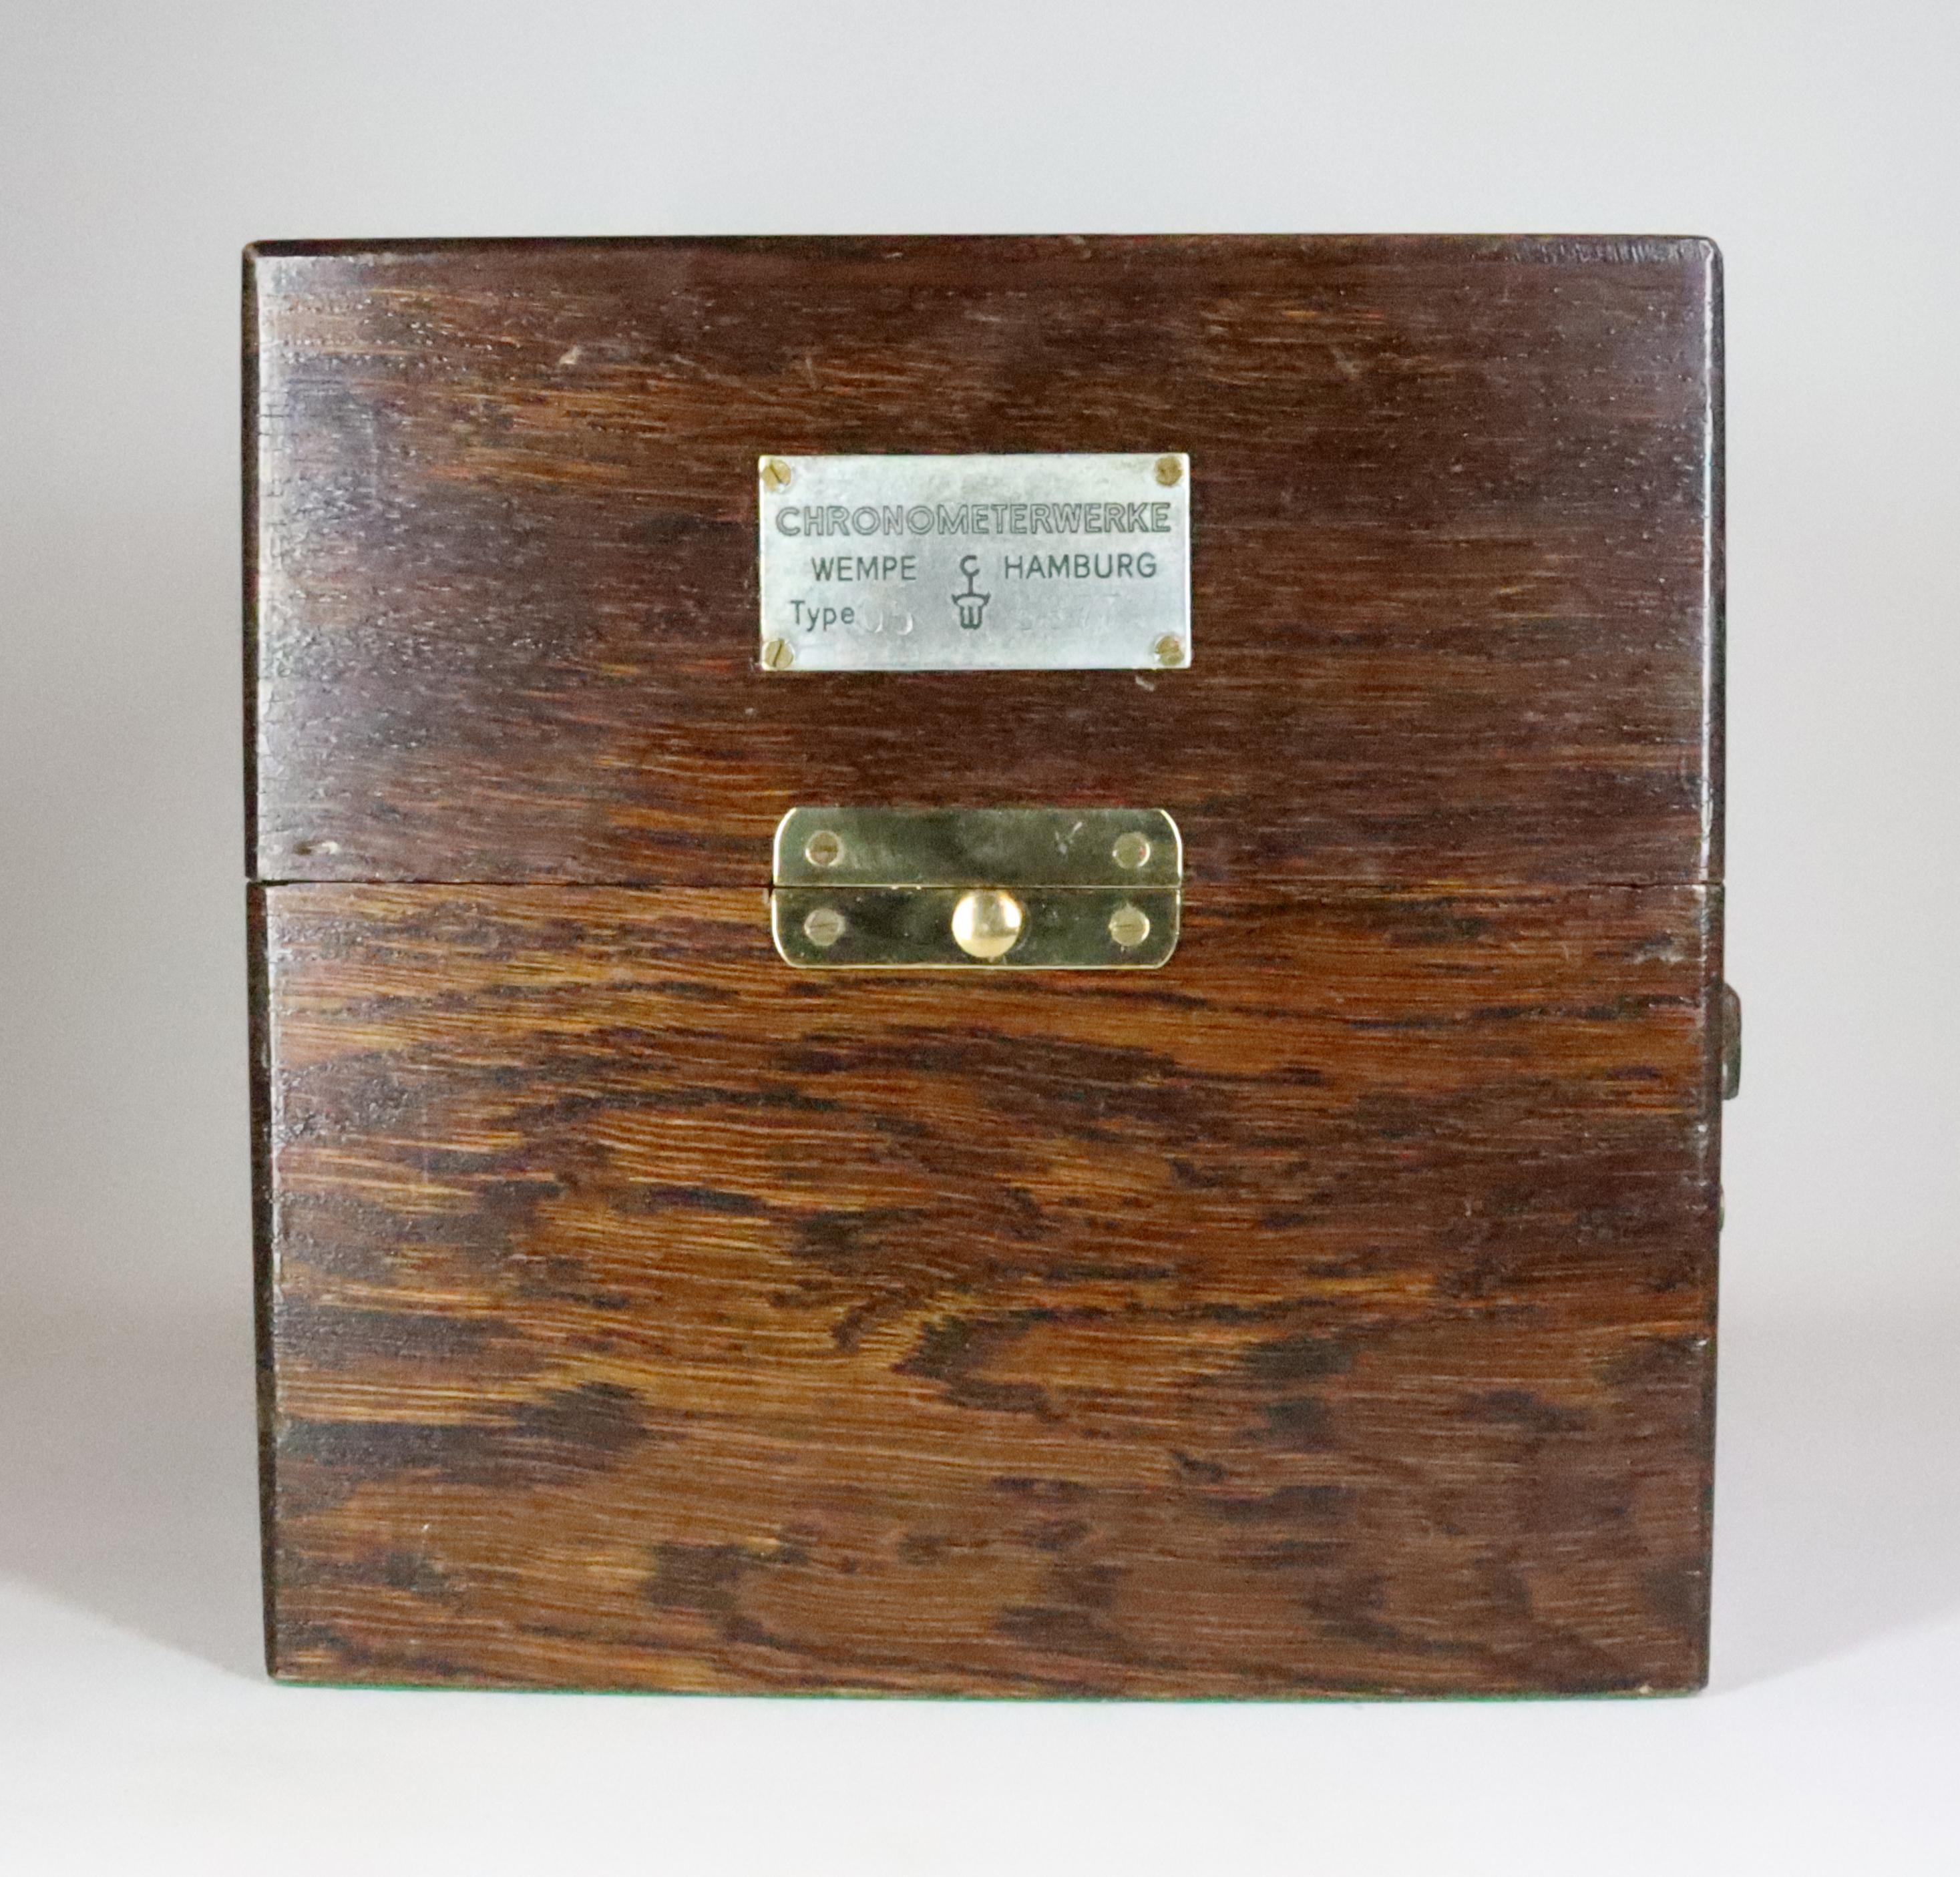 how does a marine chronometer work